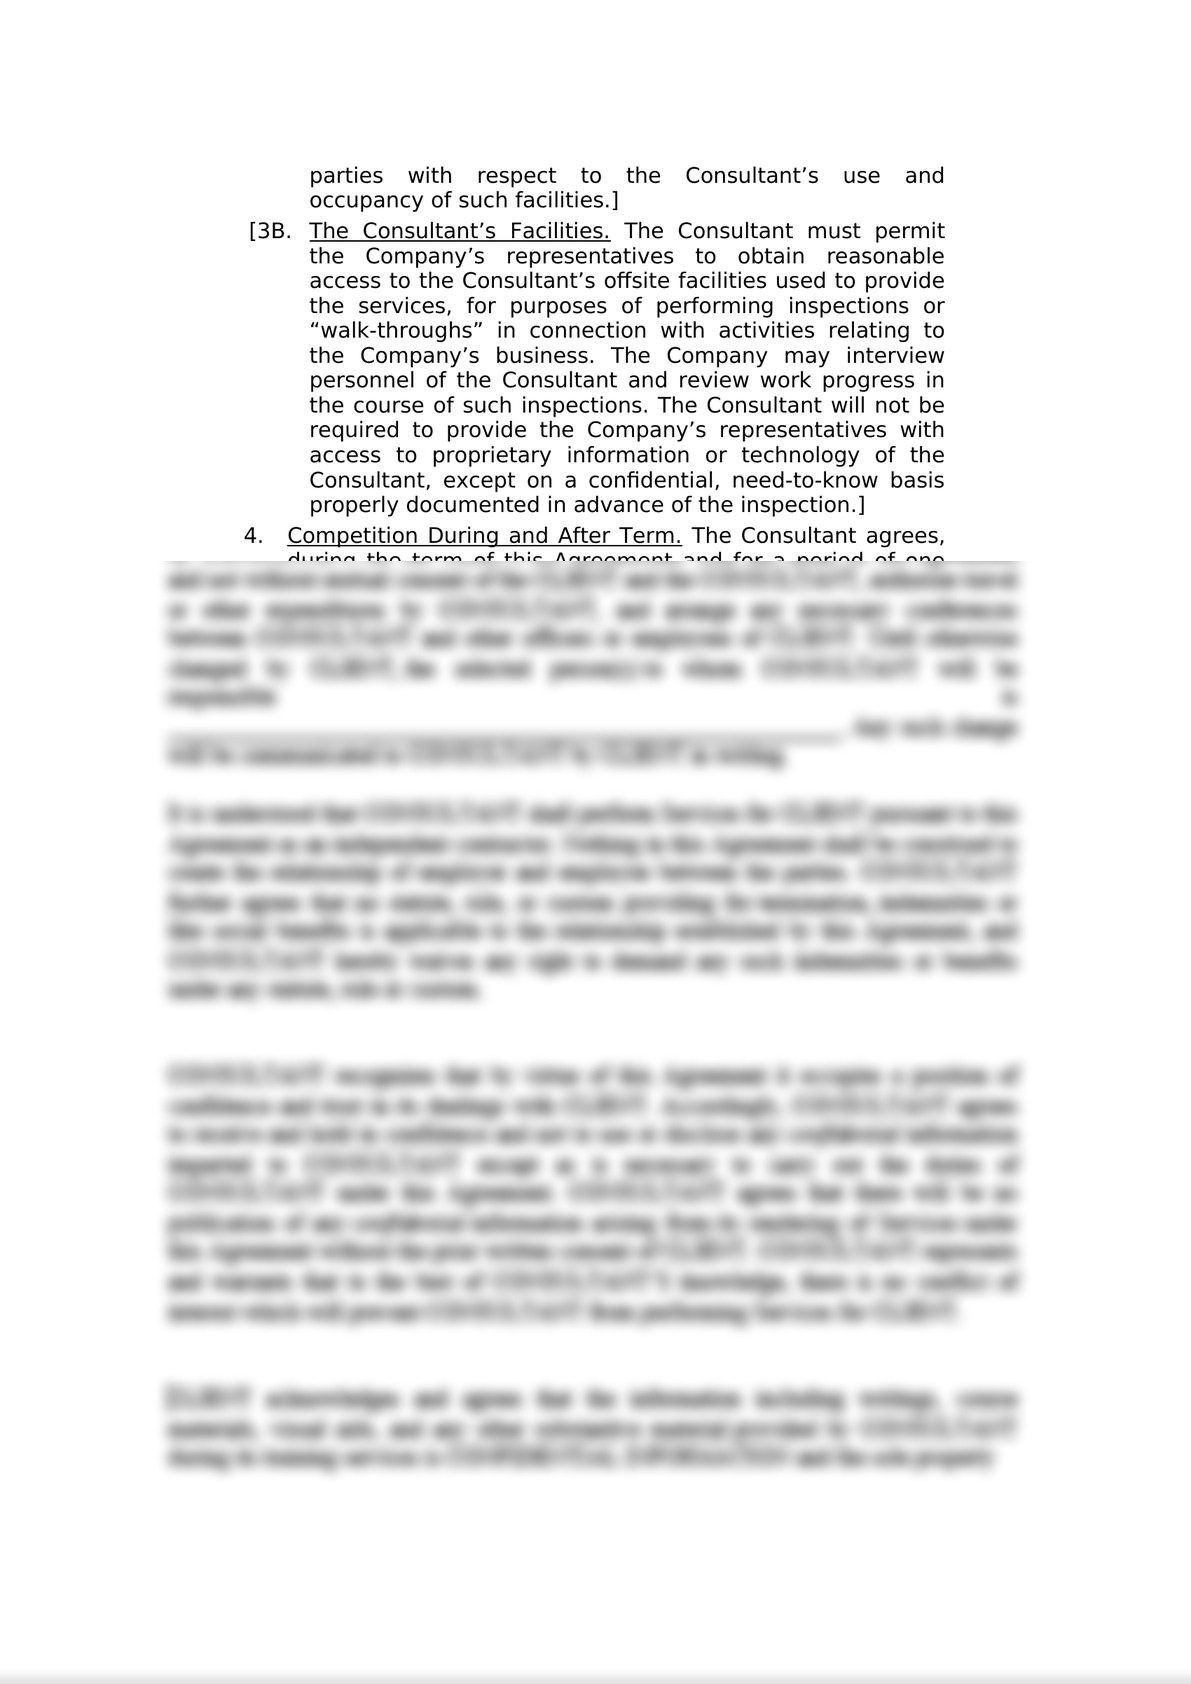 Consulting Agreement-2